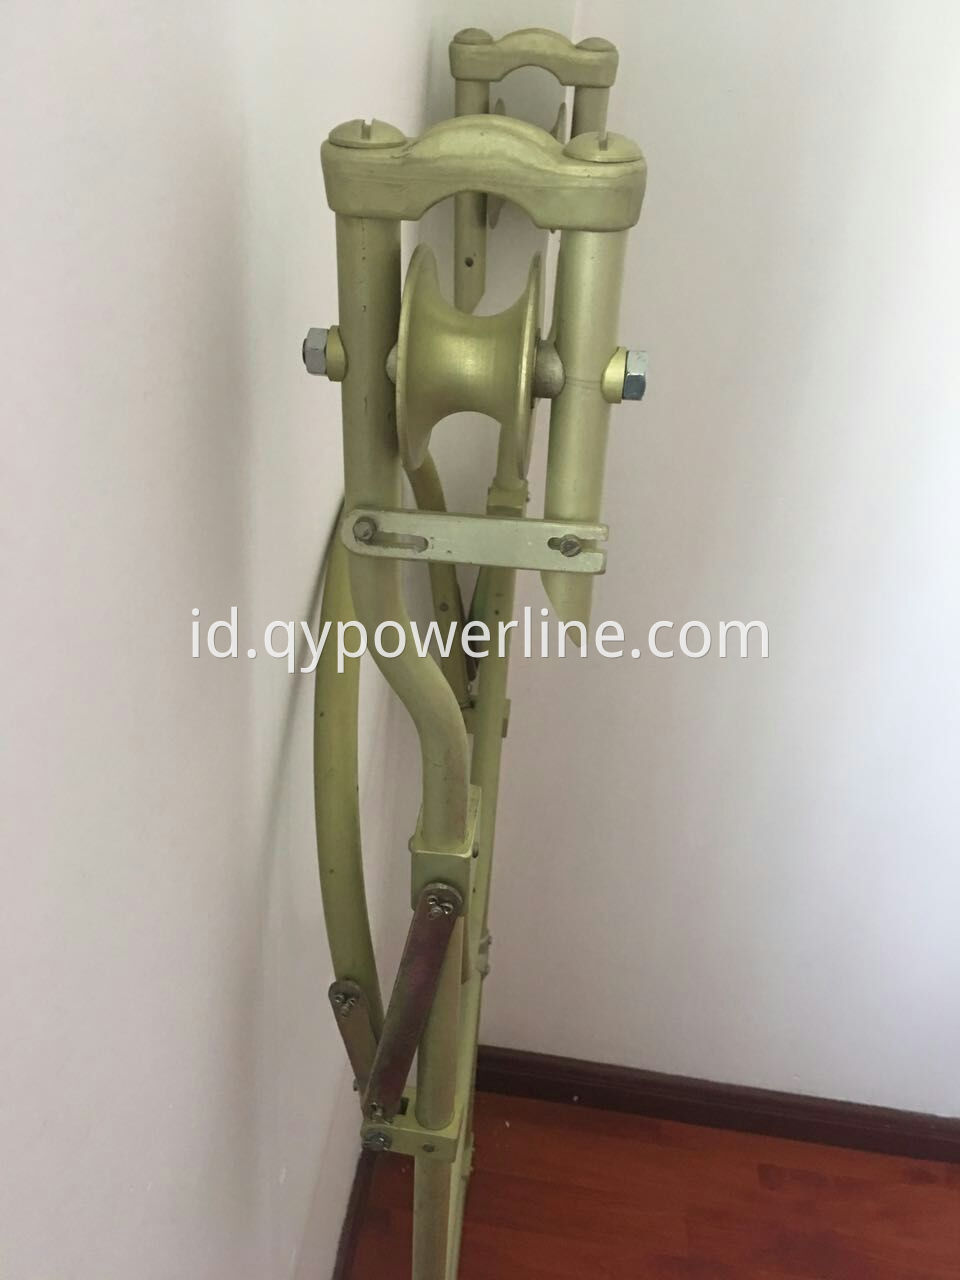 Aluminum adjustable stainless Rope ladder